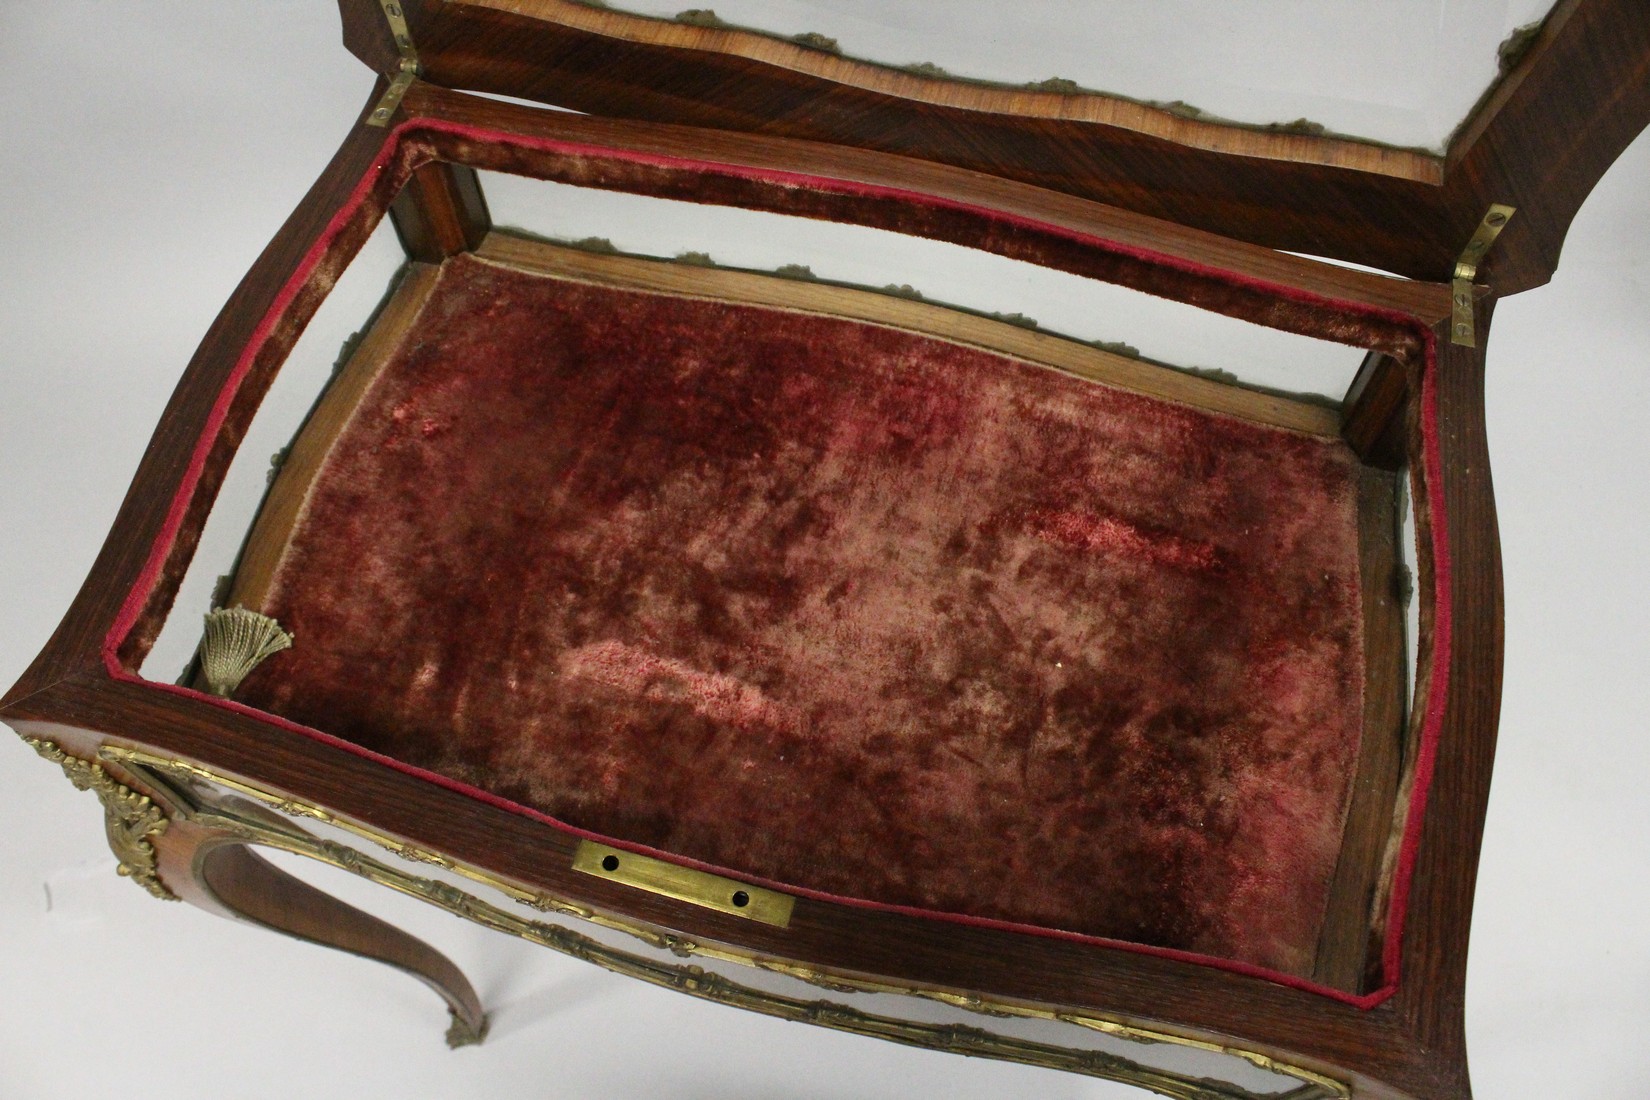 A GOOD 19TH CENTURY FRENCH ROSEWOOD BIJOUTERIE TABLE with ornate mounts, lift-up glazed top, glass - Image 6 of 11